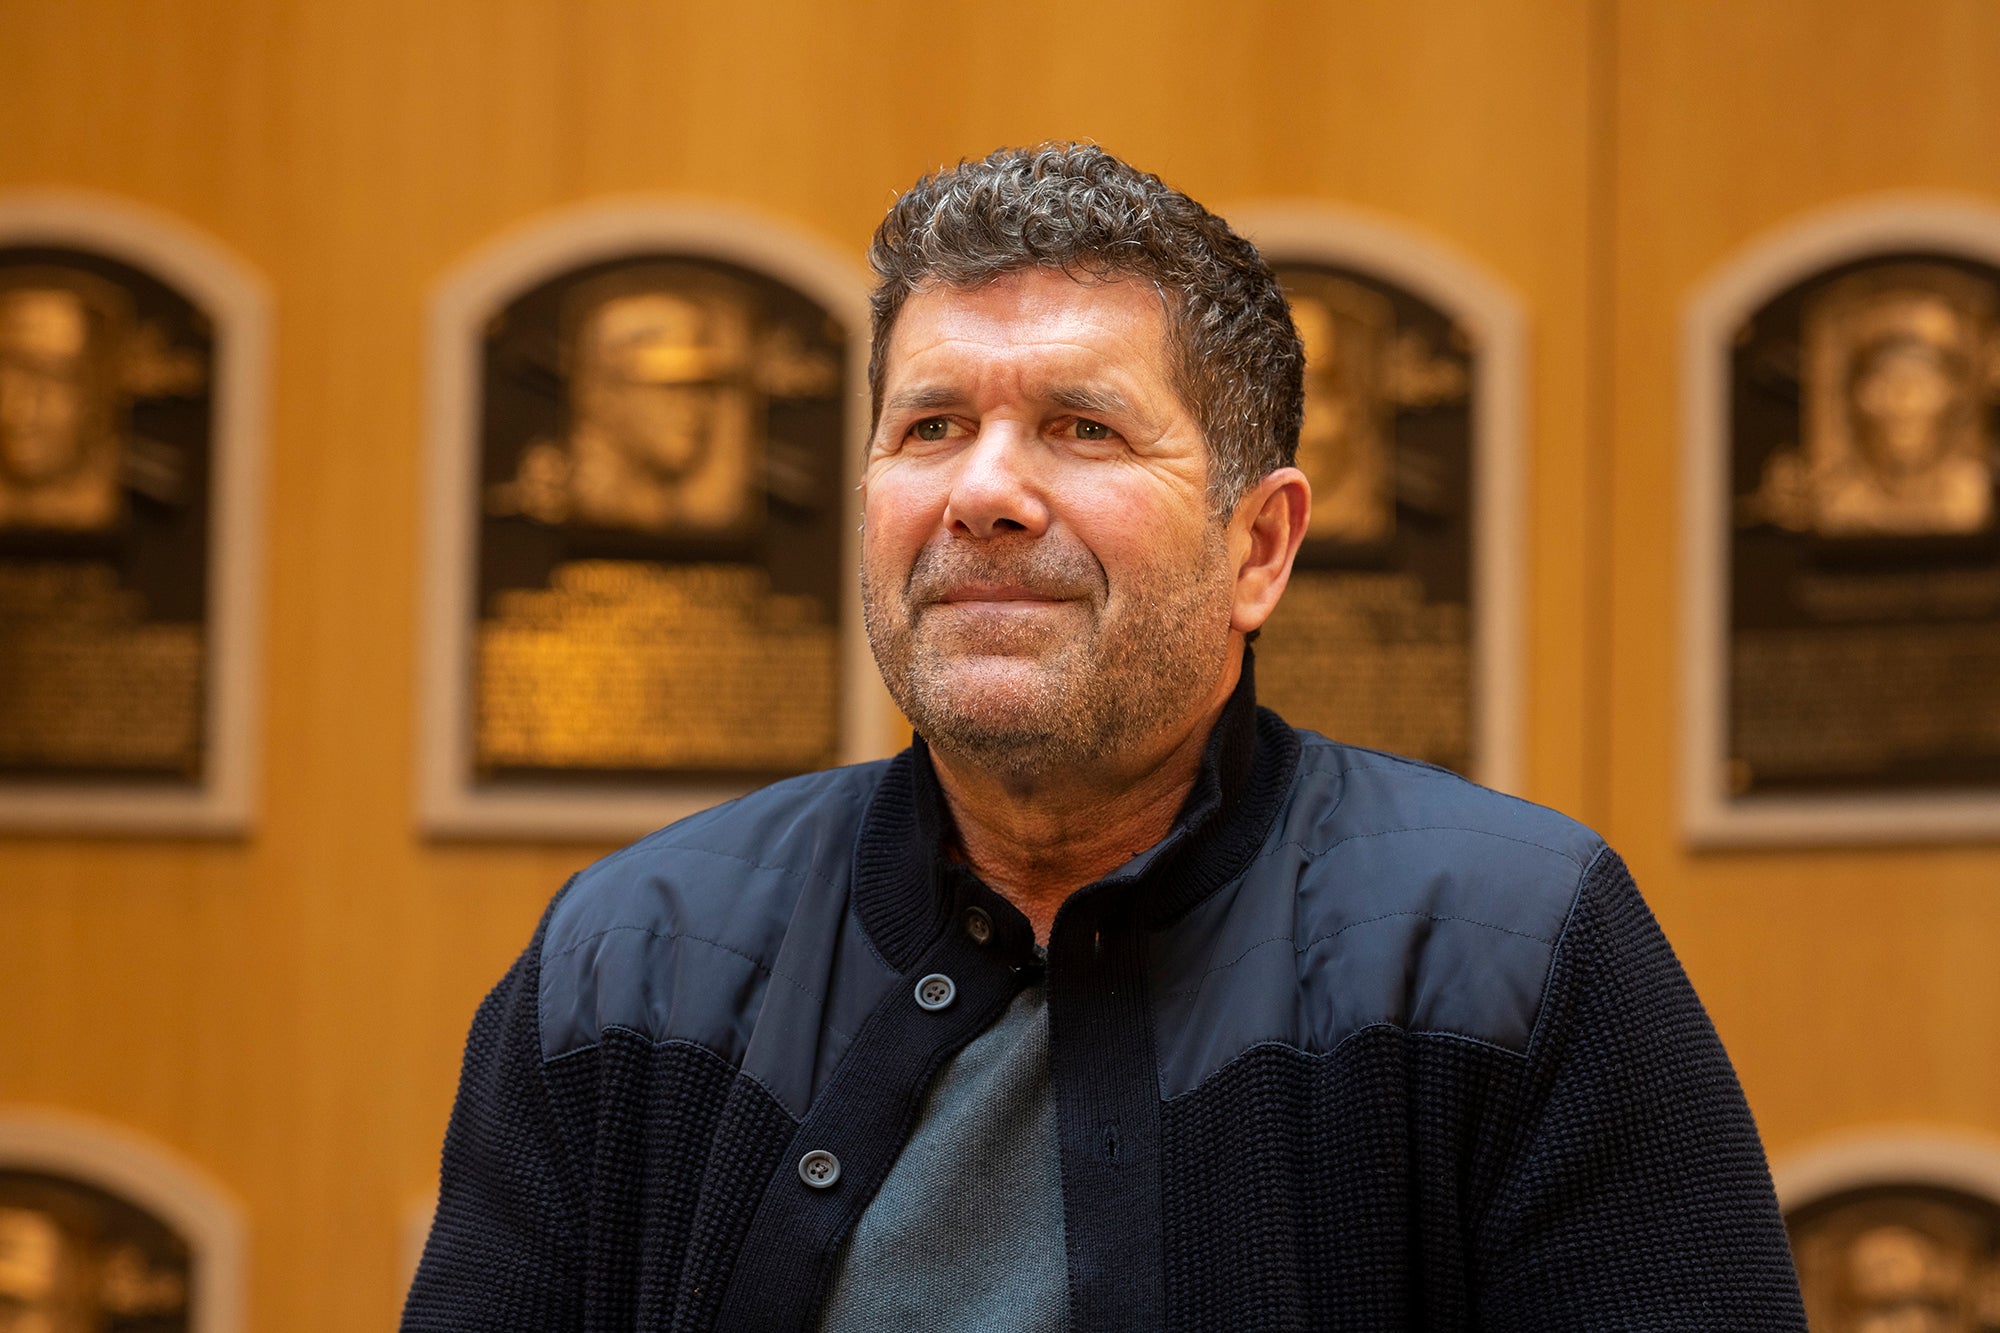 National Baseball Hall of Fame and Museum ⚾ on X: #OTD in 1990, Edgar  Martinez made his first start at designated hitter for the @Mariners. Over  the next 15 years of his